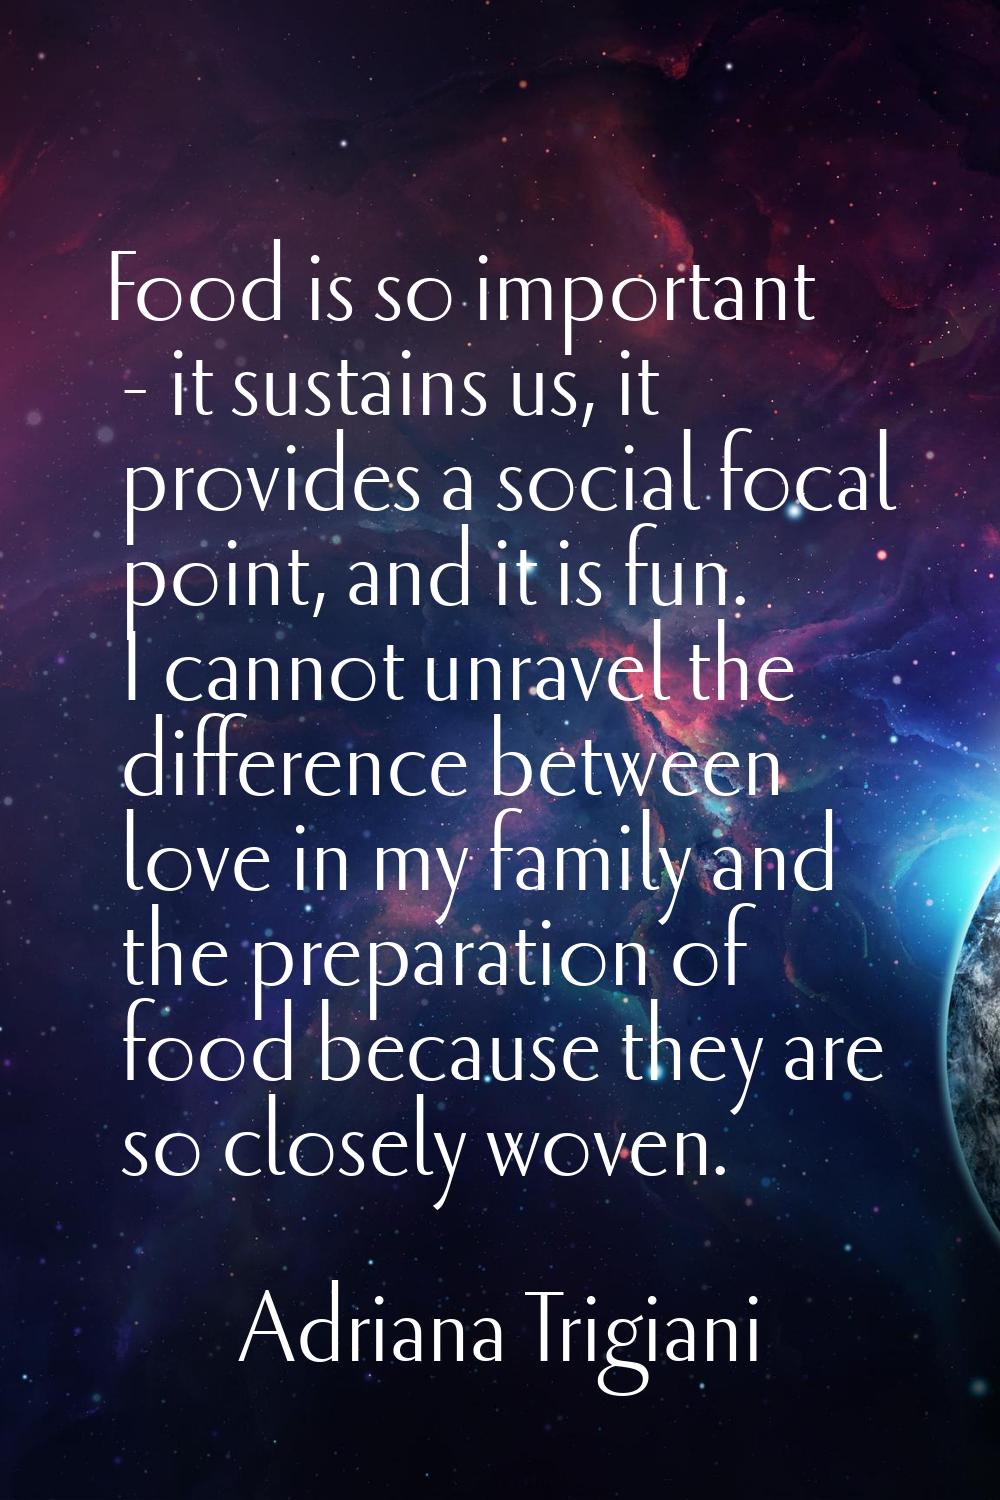 Food is so important - it sustains us, it provides a social focal point, and it is fun. I cannot un